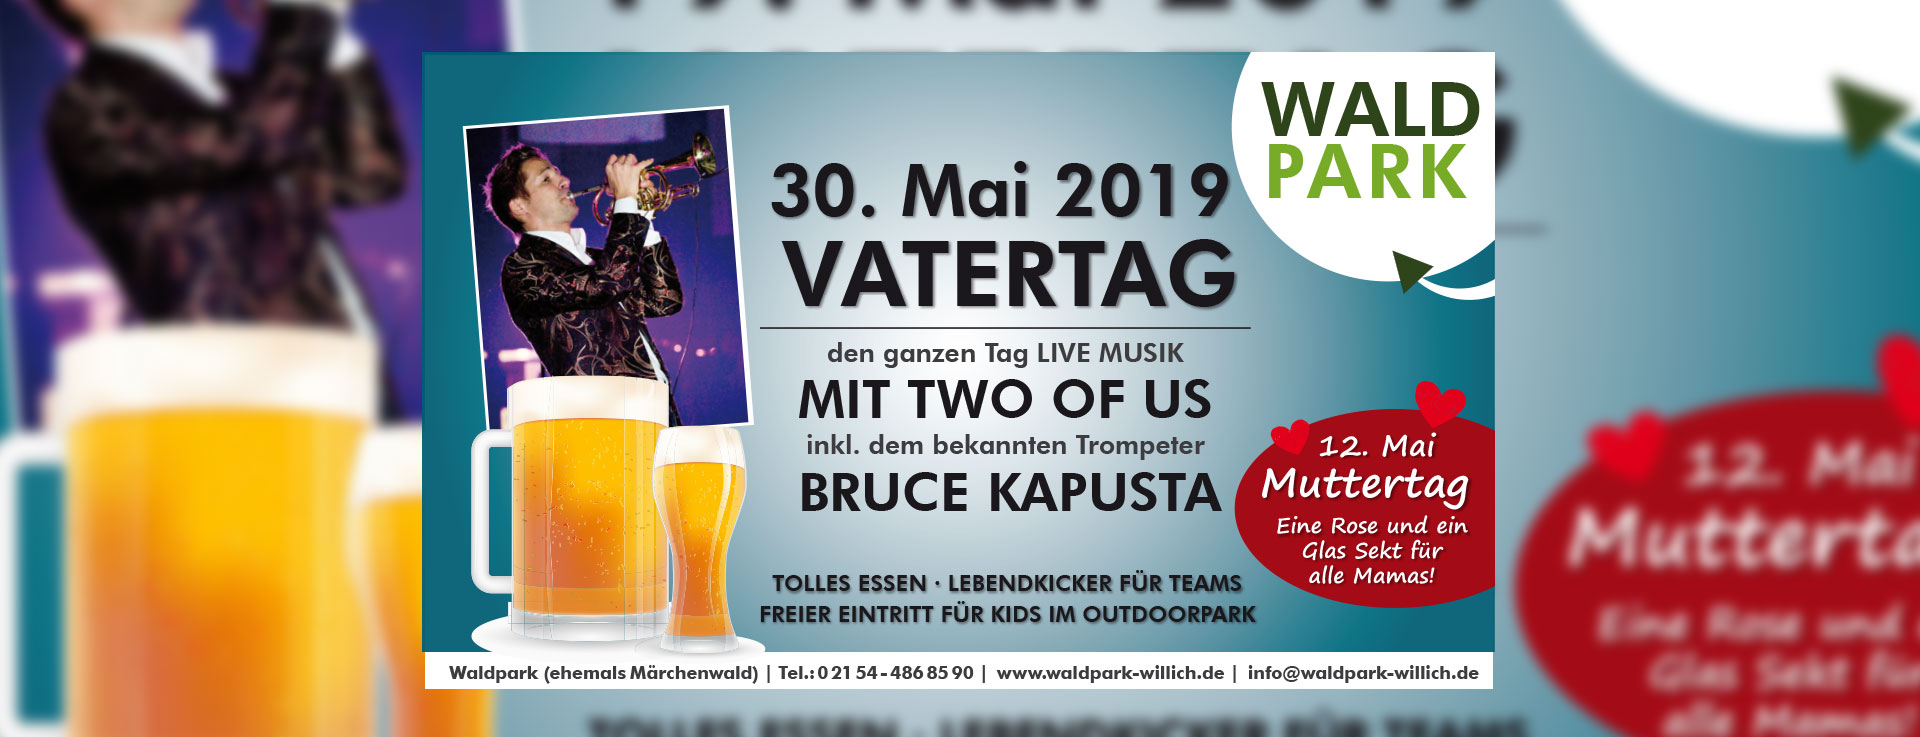 waldpark willich vatertag muttertag two of us 2019